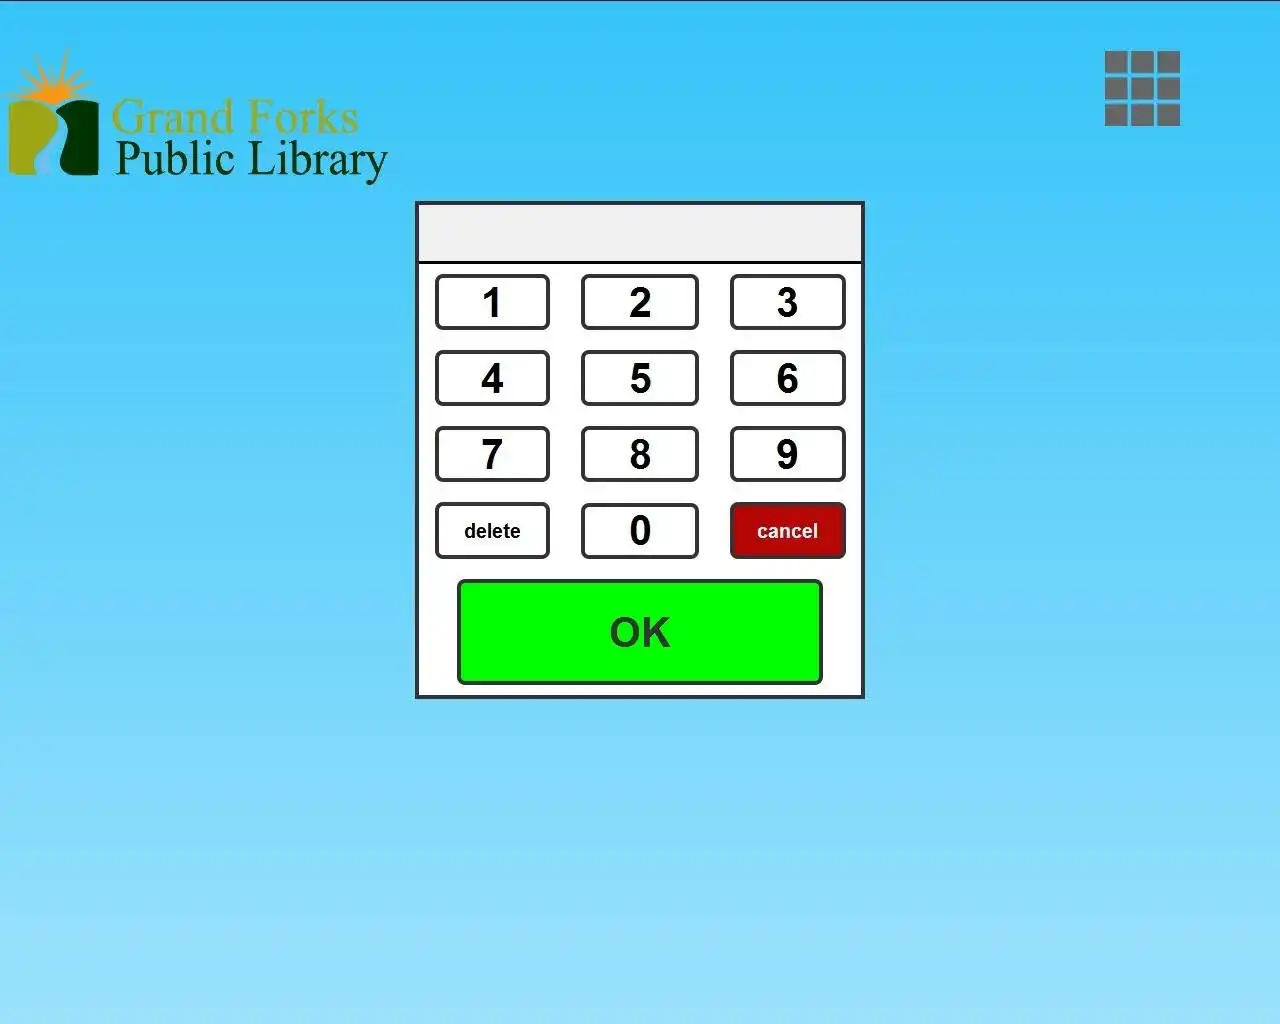 Download web tool or web app LibrarySelfCheck